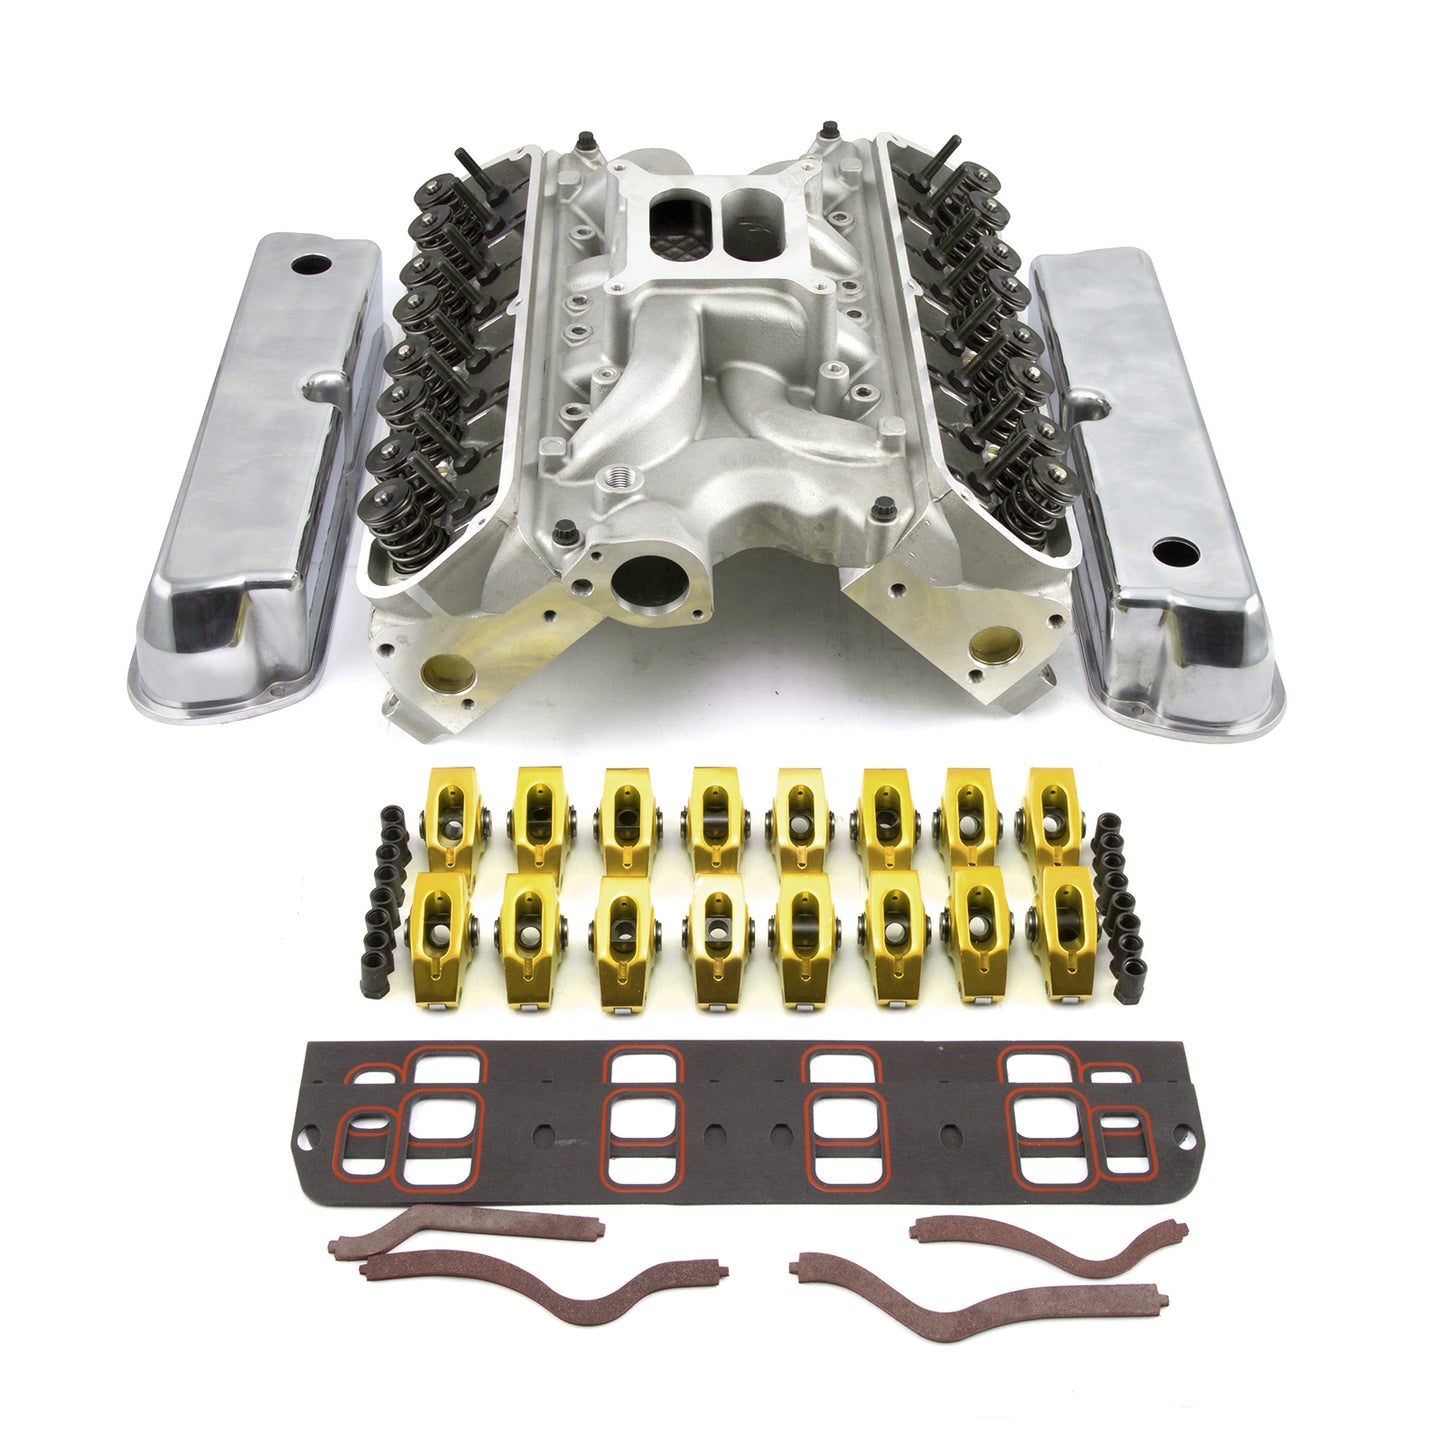 Speedmaster PCE435.1024 Fits Ford SB 289 302 Hyd Roller 190cc Cylinder Head Top End Engine Combo Kit